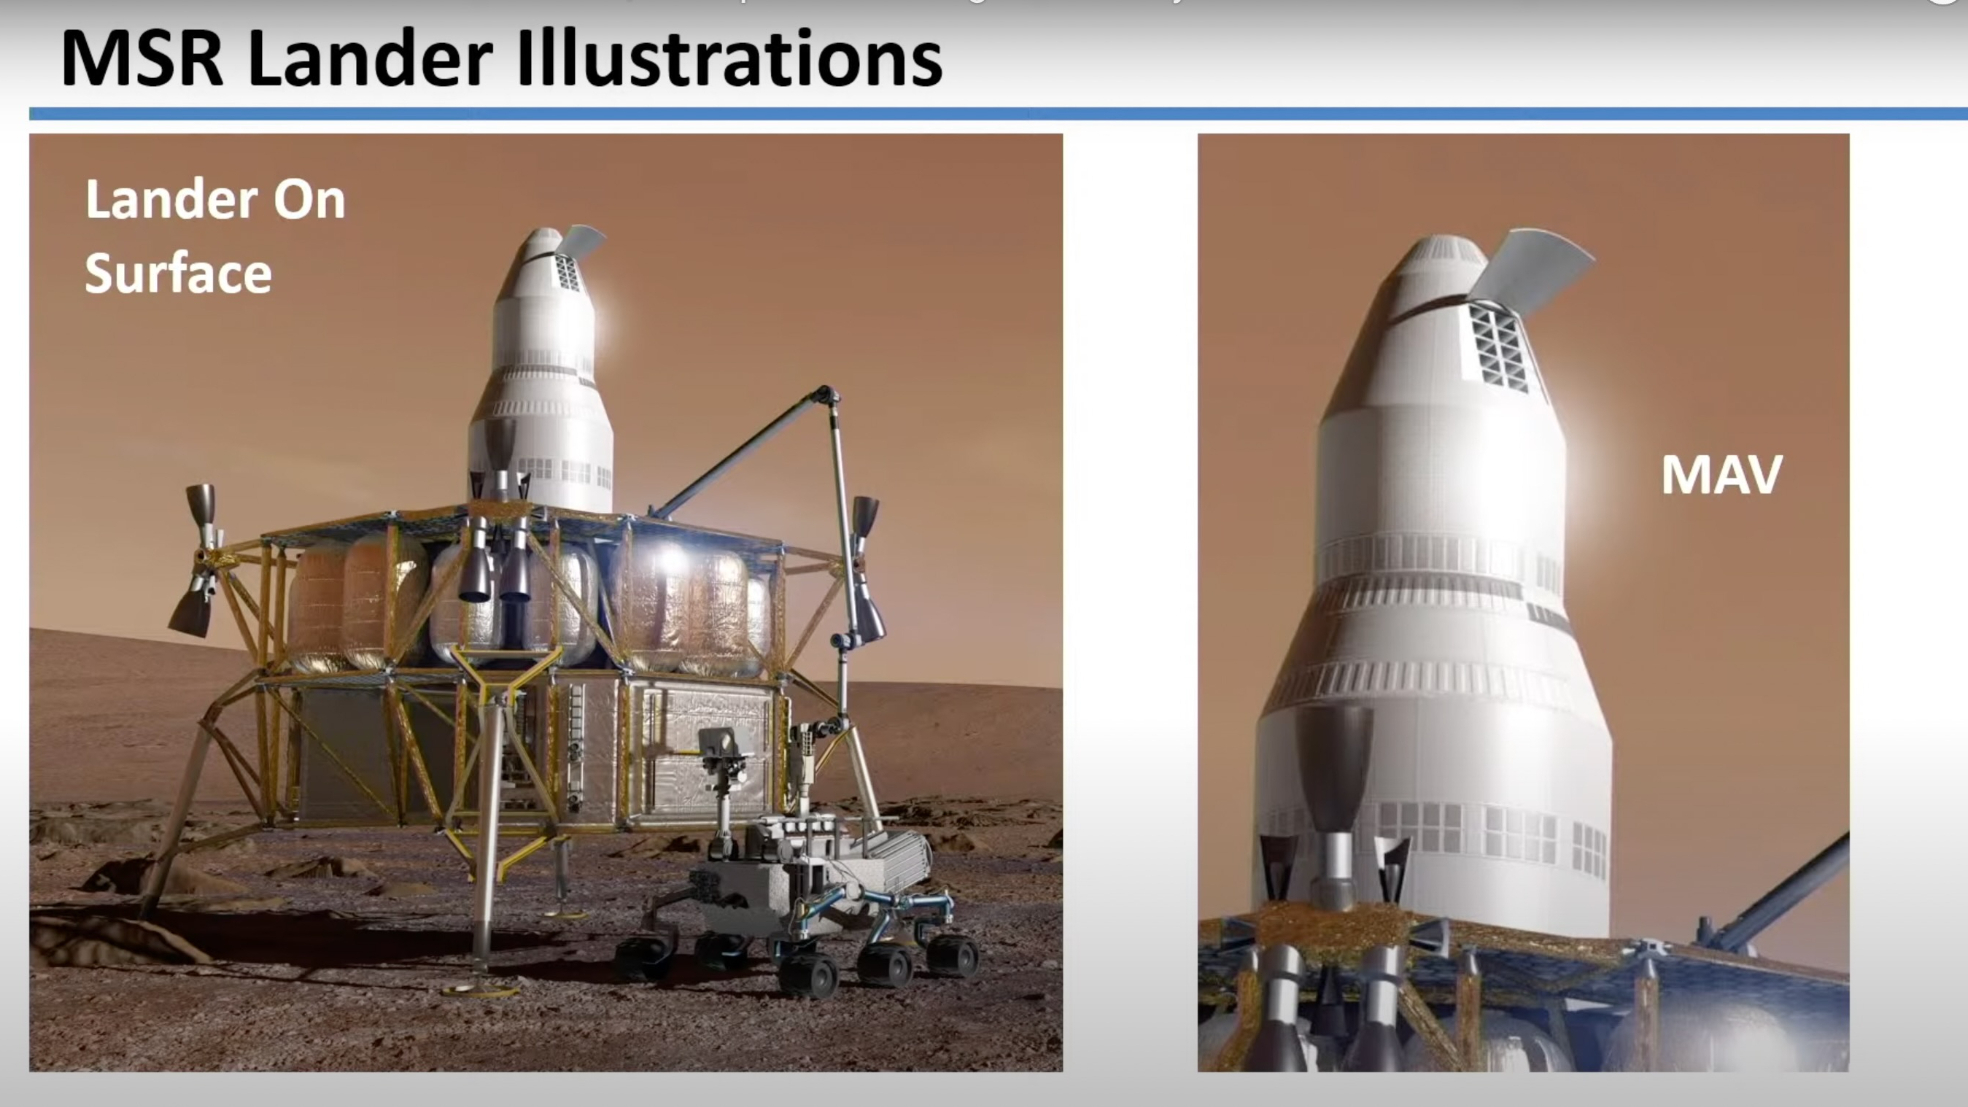 illustration of a large lander with an attached rocket on its deck, sitting next to a rover on the red dirt of mars